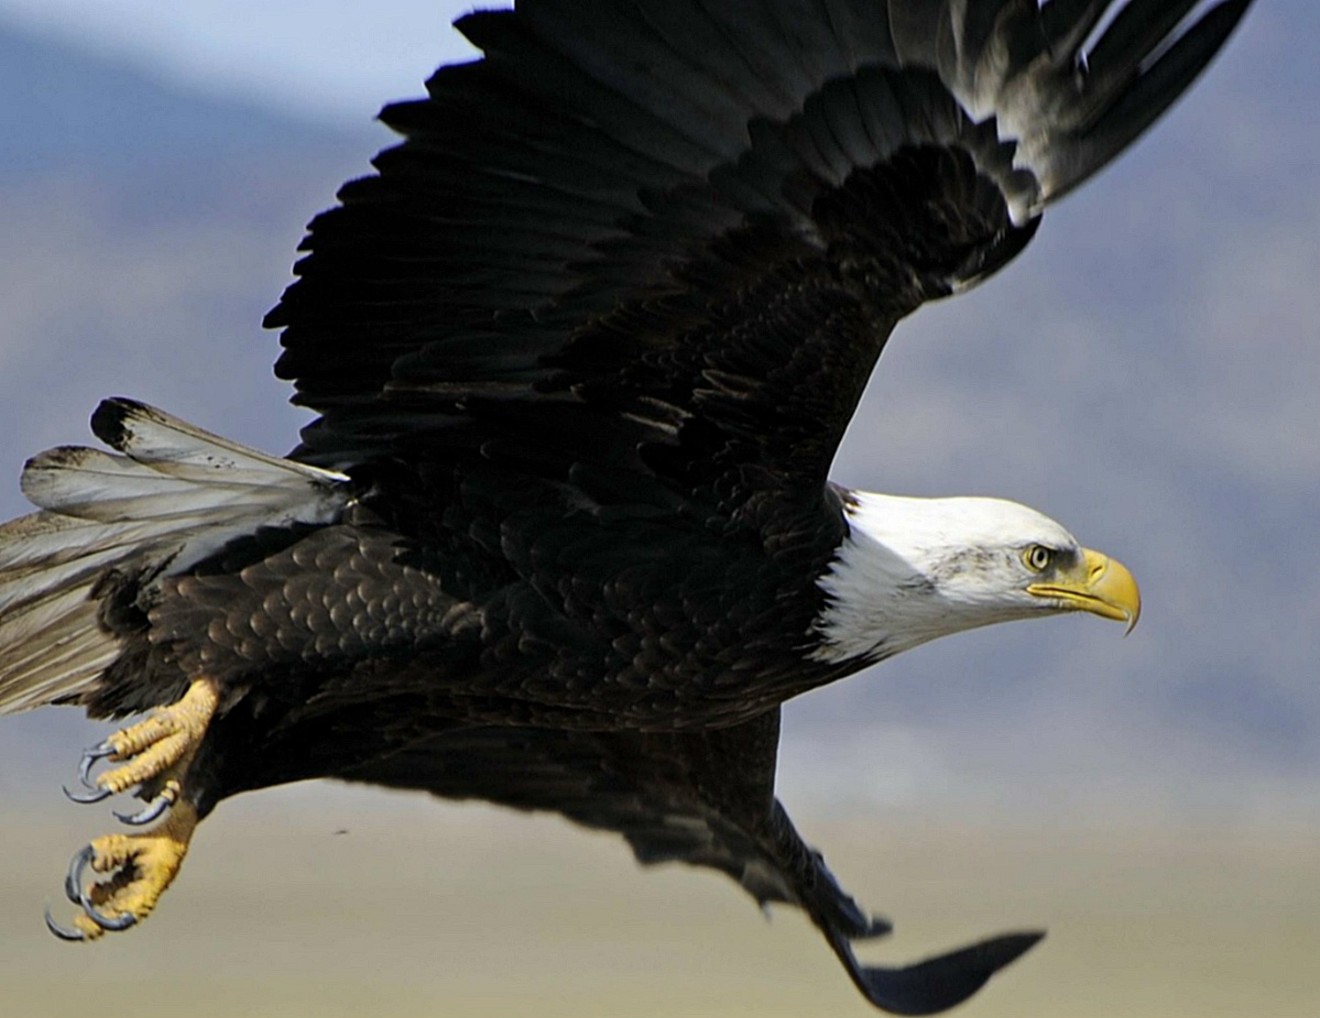 The bald eagle, one of the many species that benefited from the Endangered Species Act.